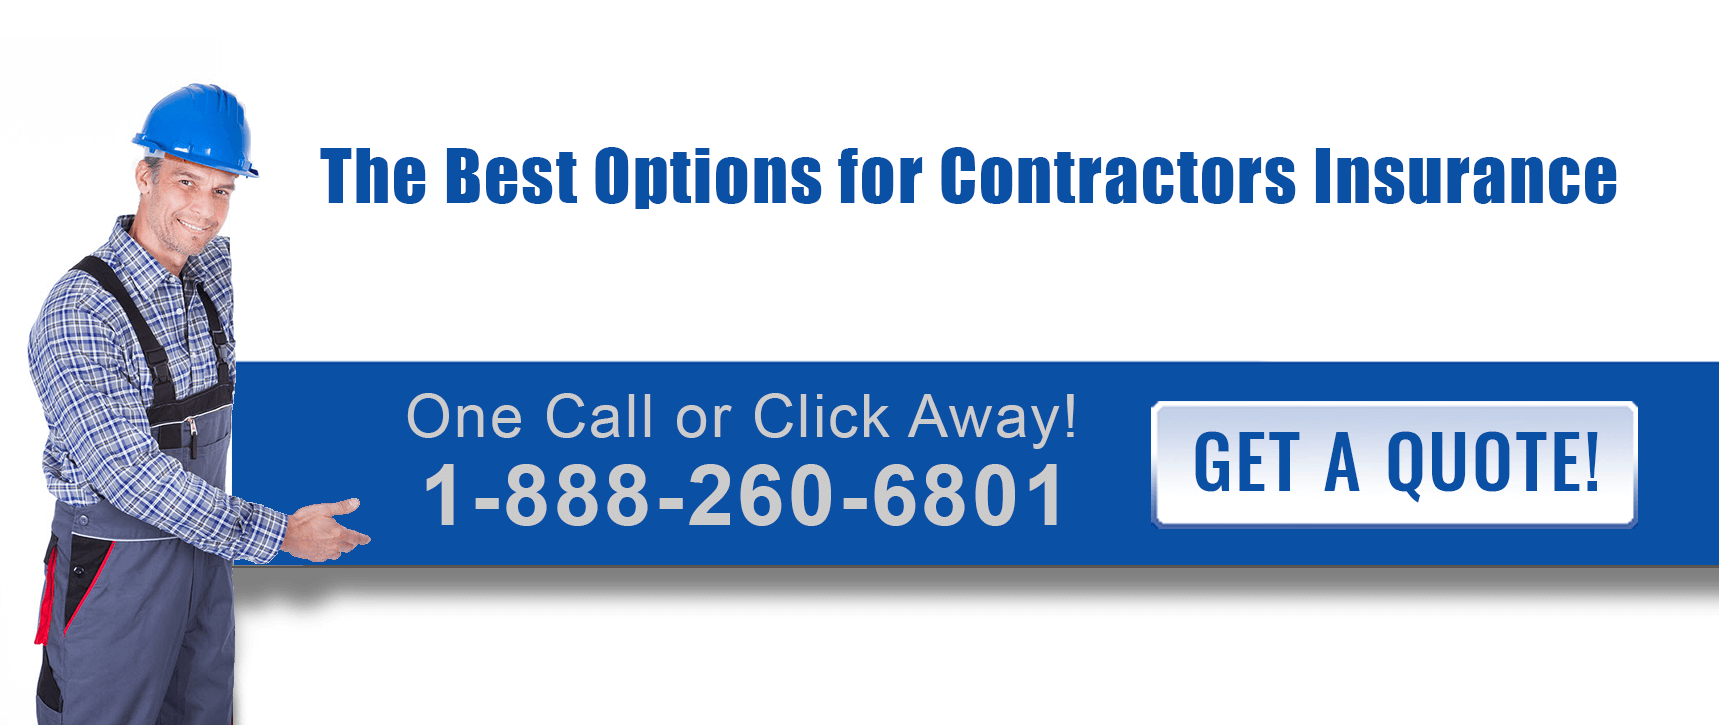 The Best Options For Contractors Insurance